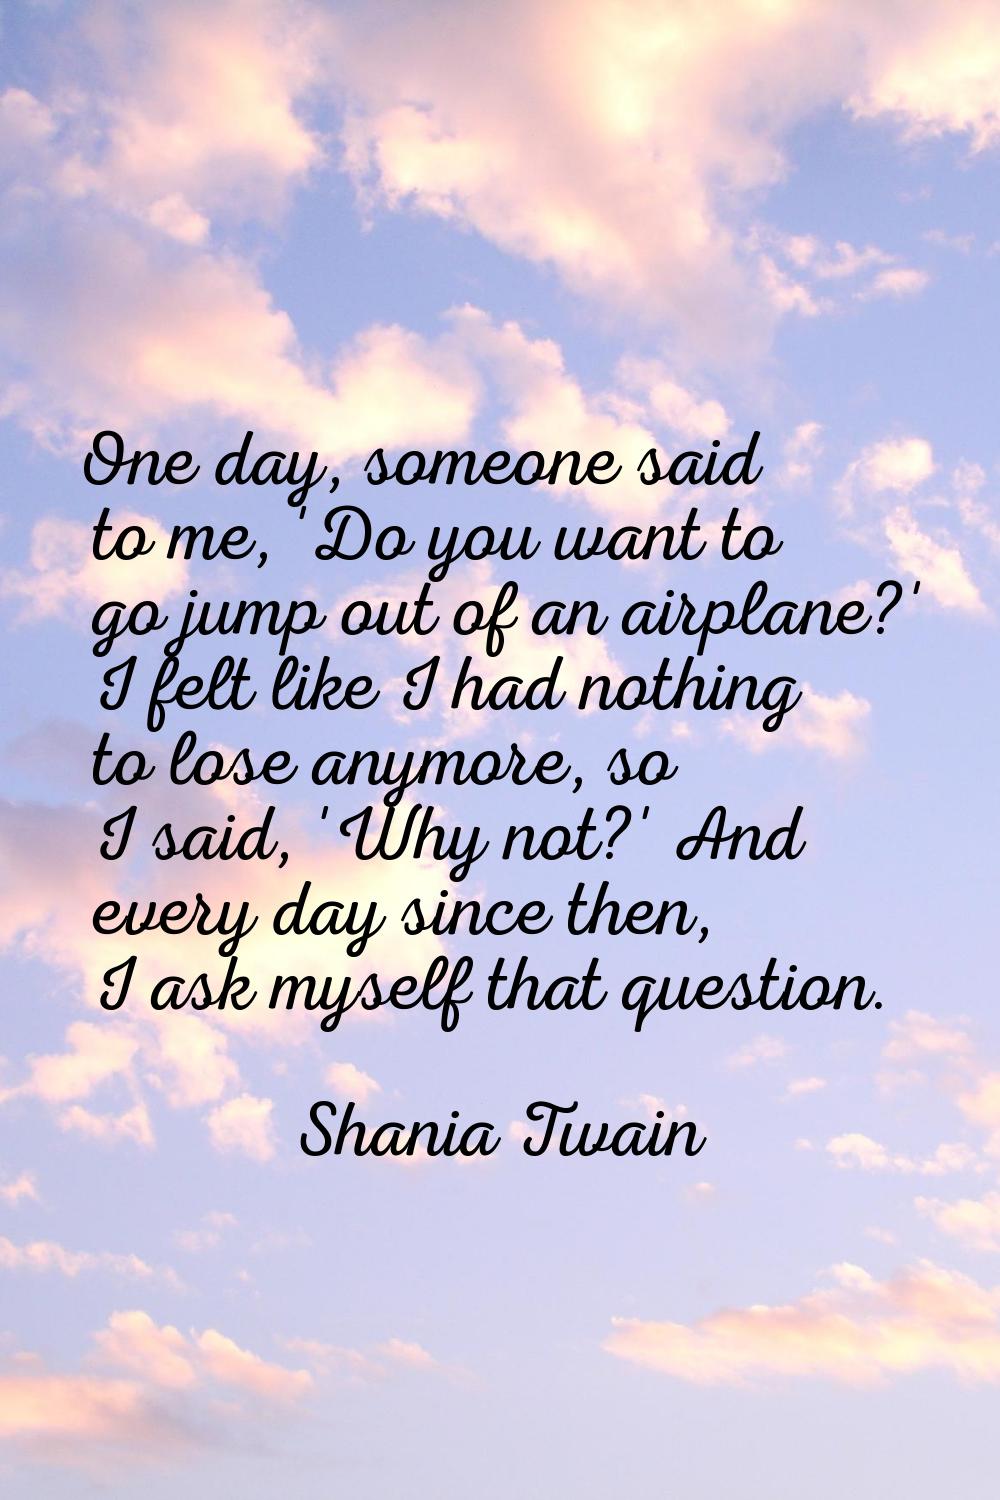 One day, someone said to me, 'Do you want to go jump out of an airplane?' I felt like I had nothing